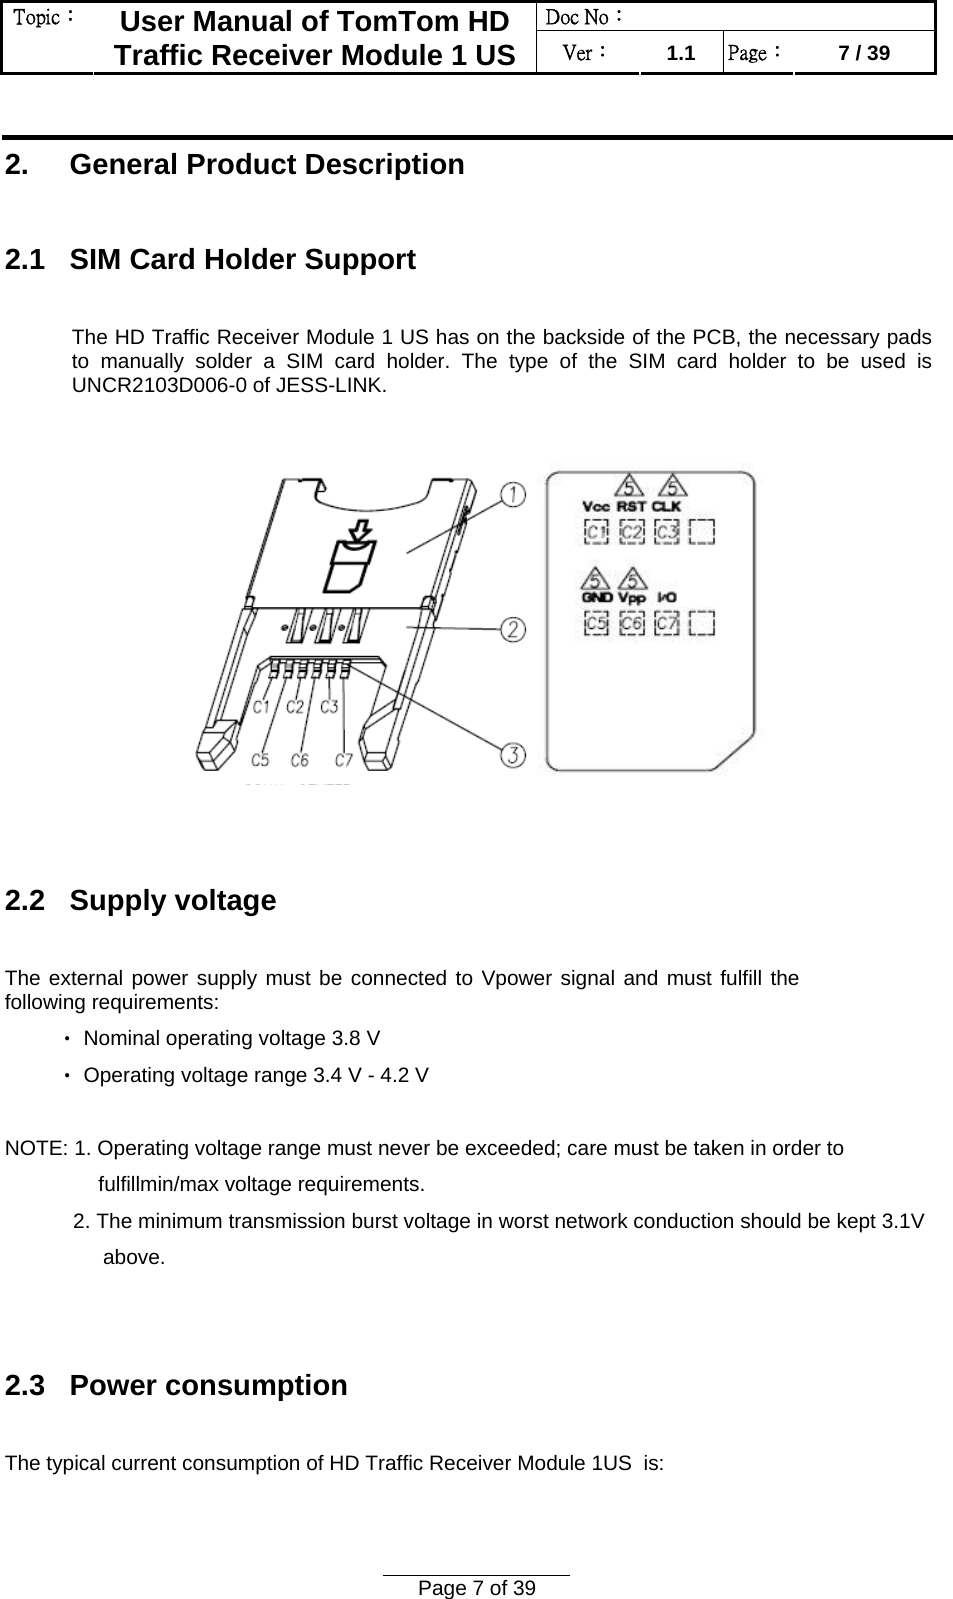 Doc No：  Topic：  User Manual of TomTom HD Traffic Receiver Module 1 US  Ver：  1.1  Page：  7 / 39  Page 7 of 39   2.     General Product Description  2.1   SIM Card Holder Support  The HD Traffic Receiver Module 1 US has on the backside of the PCB, the necessary pads to manually solder a SIM card holder. The type of the SIM card holder to be used is UNCR2103D006-0 of JESS-LINK.      2.2   Supply voltage  The external power supply must be connected to Vpower signal and must fulfill the following requirements:  Nominal operating voltage 3.8 V‧  Operating voltage ra‧nge 3.4 V - 4.2 V  NOTE: 1. Operating voltage range must never be exceeded; care must be taken in order to  fulfillmin/max voltage requirements. 2. The minimum transmission burst voltage in worst network conduction should be kept 3.1V  above.   2.3   Power consumption  The typical current consumption of HD Traffic Receiver Module 1US  is:  